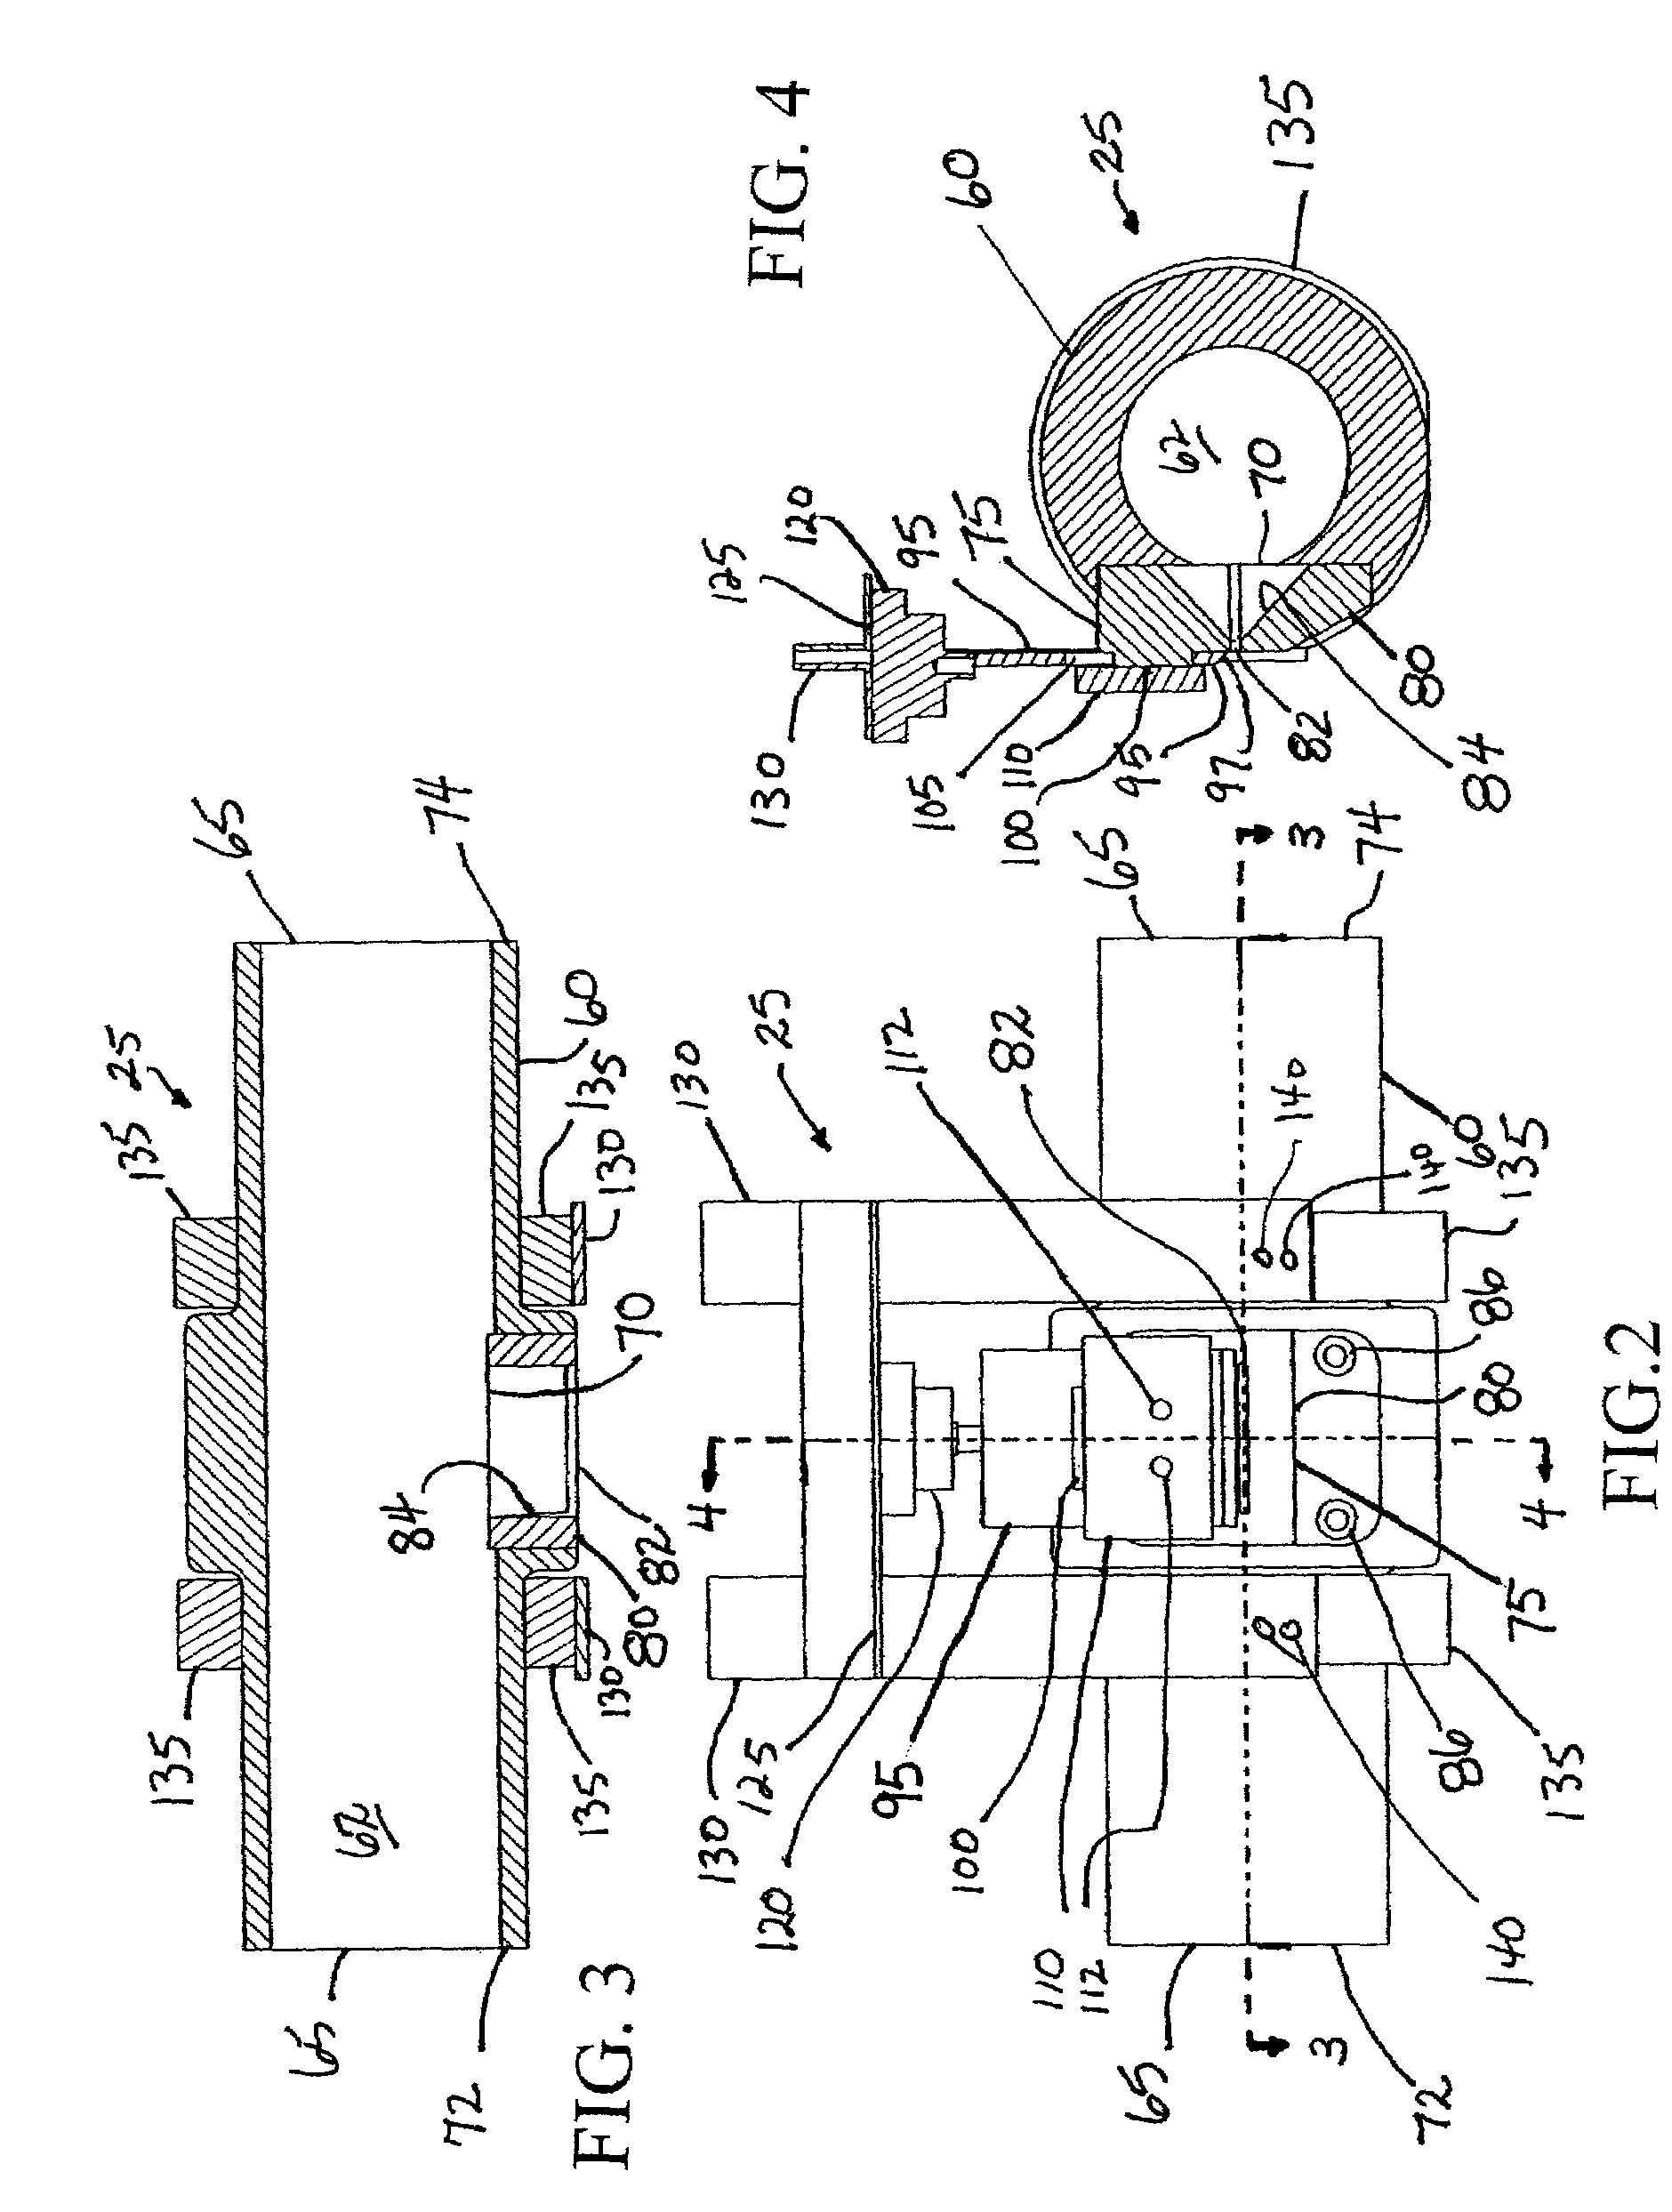 Ribbon cutter apparatus and method for making sandwich baked goods